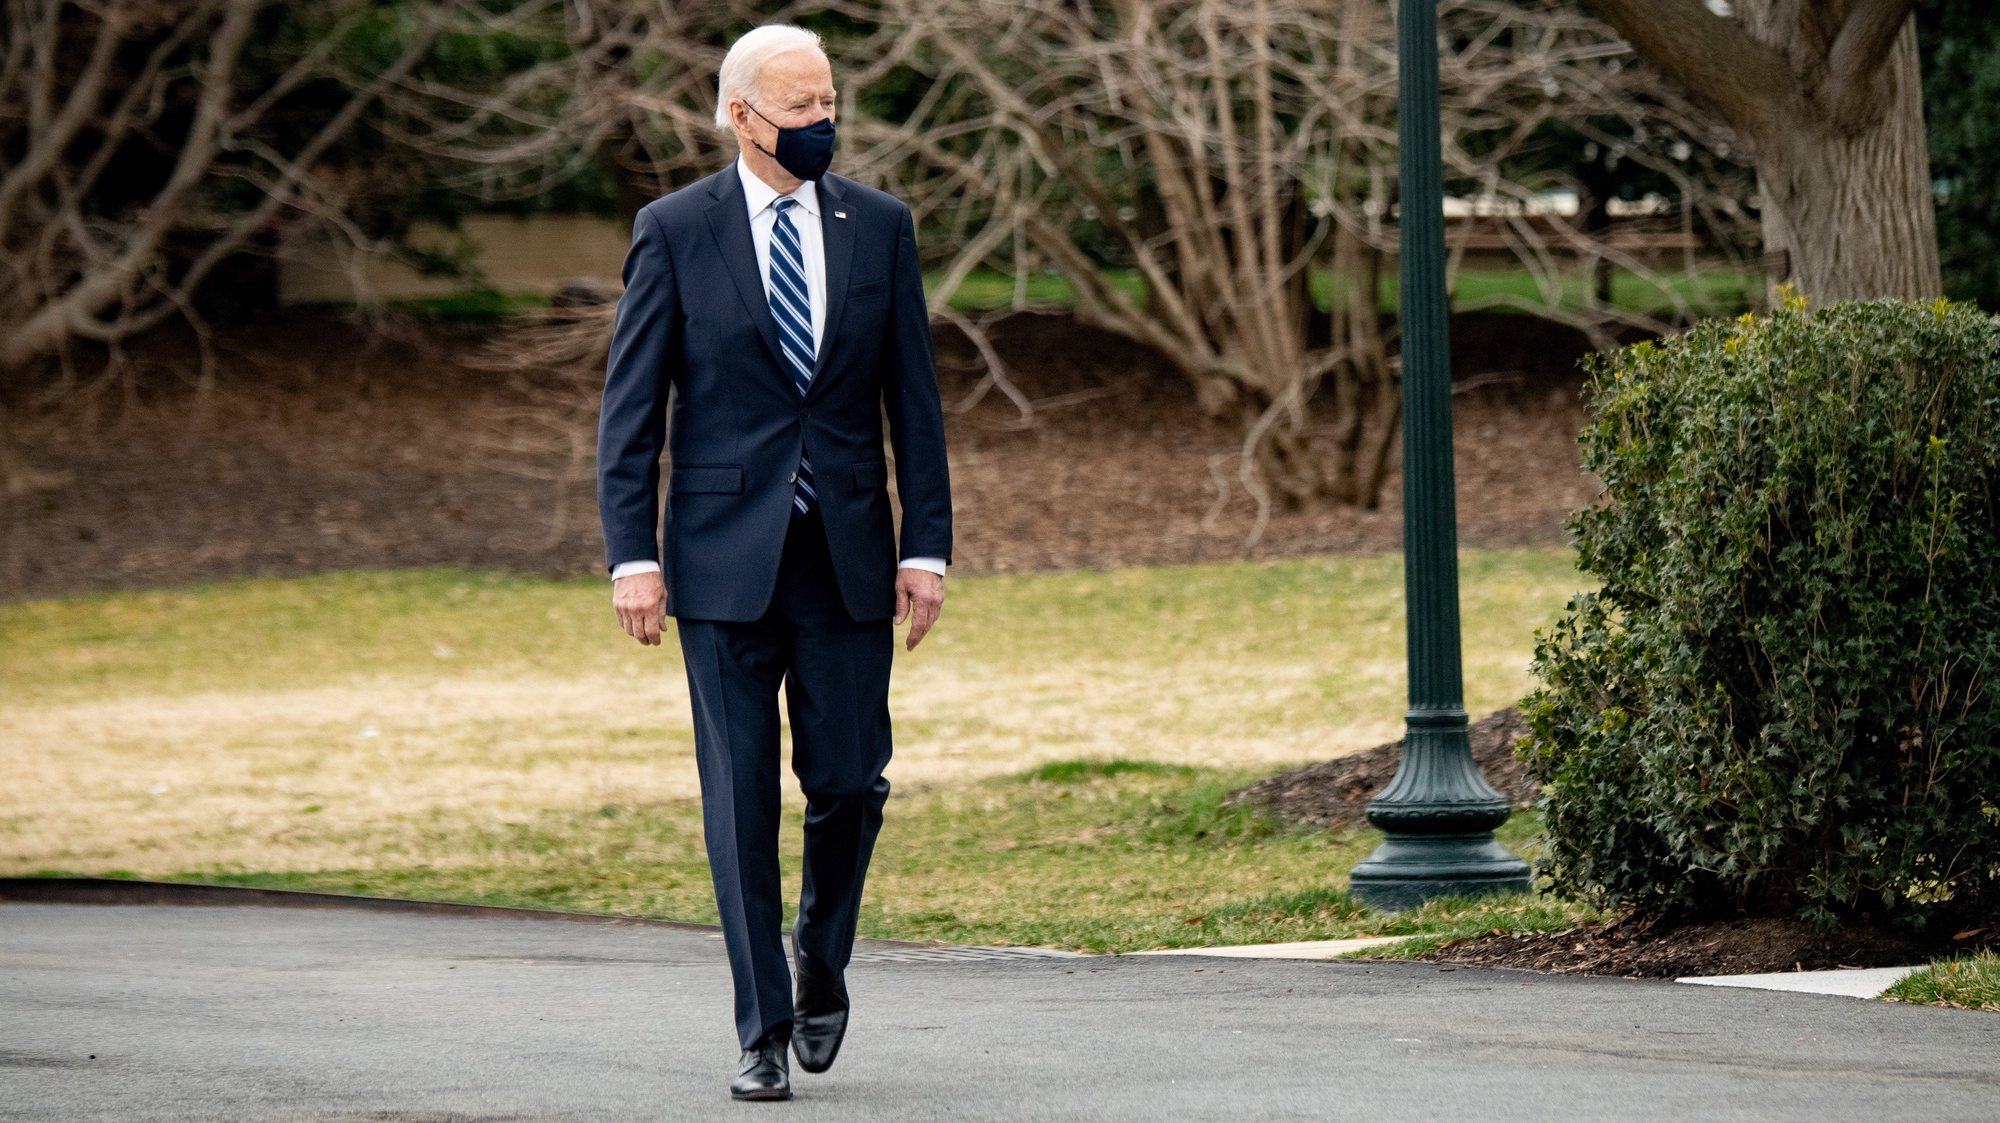 epa09078510 US President Joe Biden walks on the South Lawn of the White House before boarding Marine One in Washington, DC, USA, 16 March 2021. Biden, traveling to Pennsylvania, is fanning out across the country along with the Vice President and their spouses to highlight Americans receiving stimulus checks and coronavirus vaccines, as well as businesses that have been able to stay afloat with government loans.  EPA/ERIN SCOTT / POOL